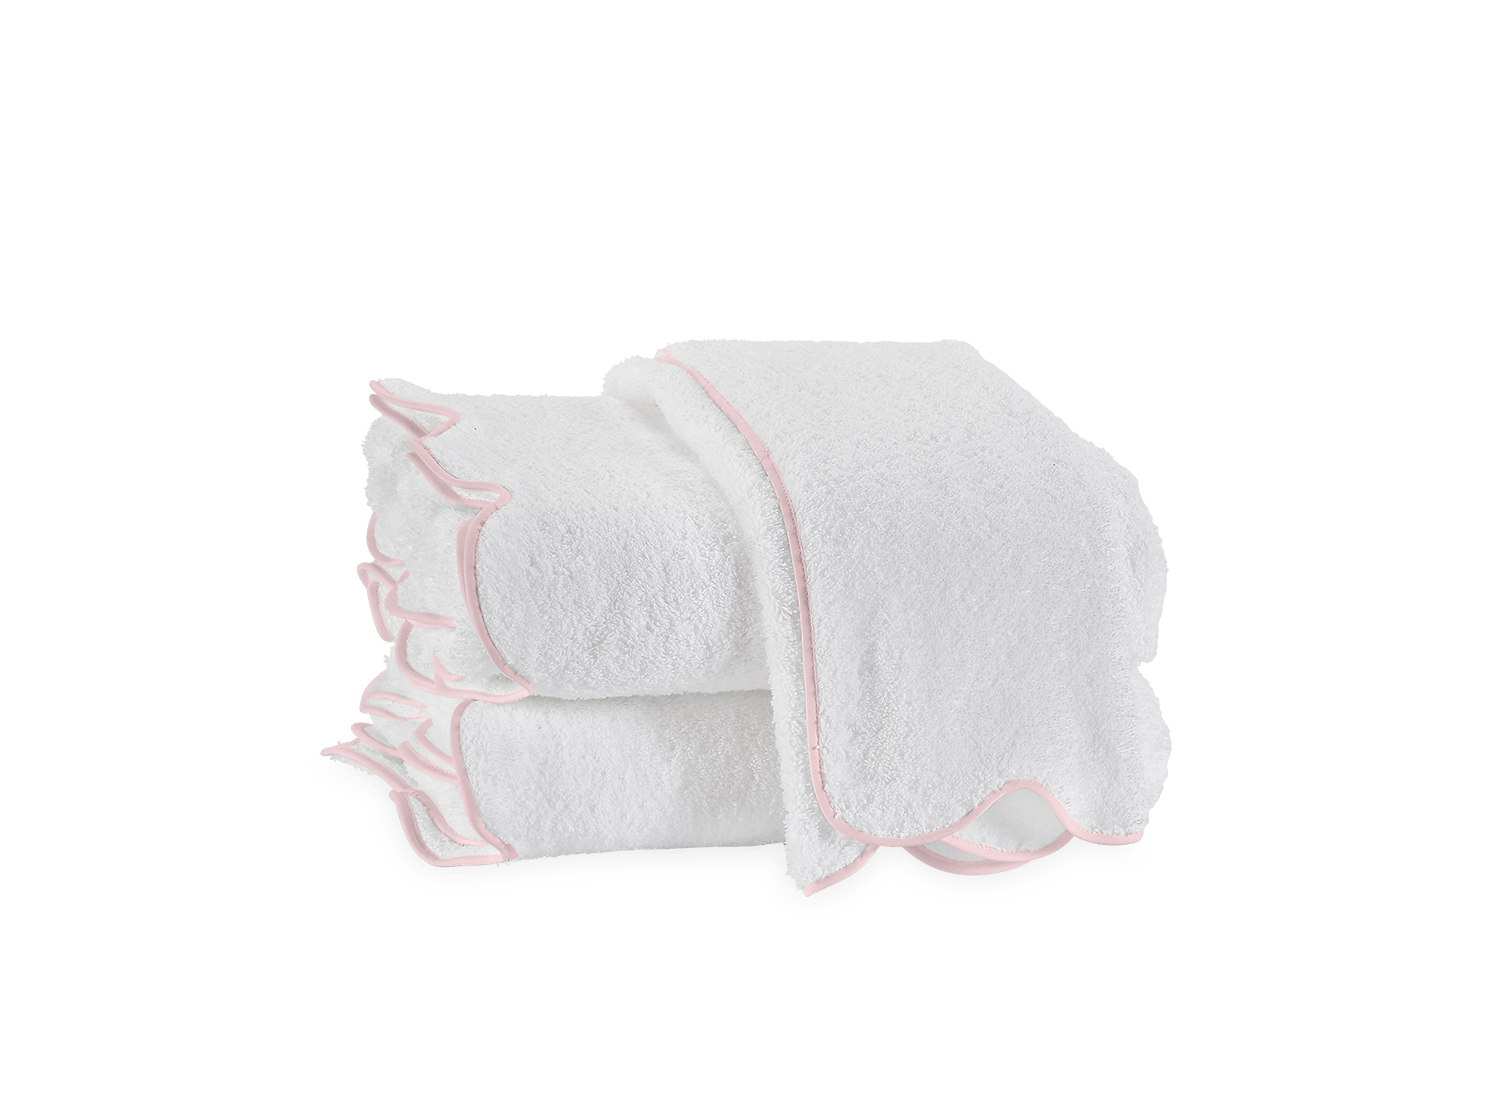 https://matouk-website.imgix.net/spree/products/9745/original/Cairo_towels_Scallop_Pink_primary.png?1642189246